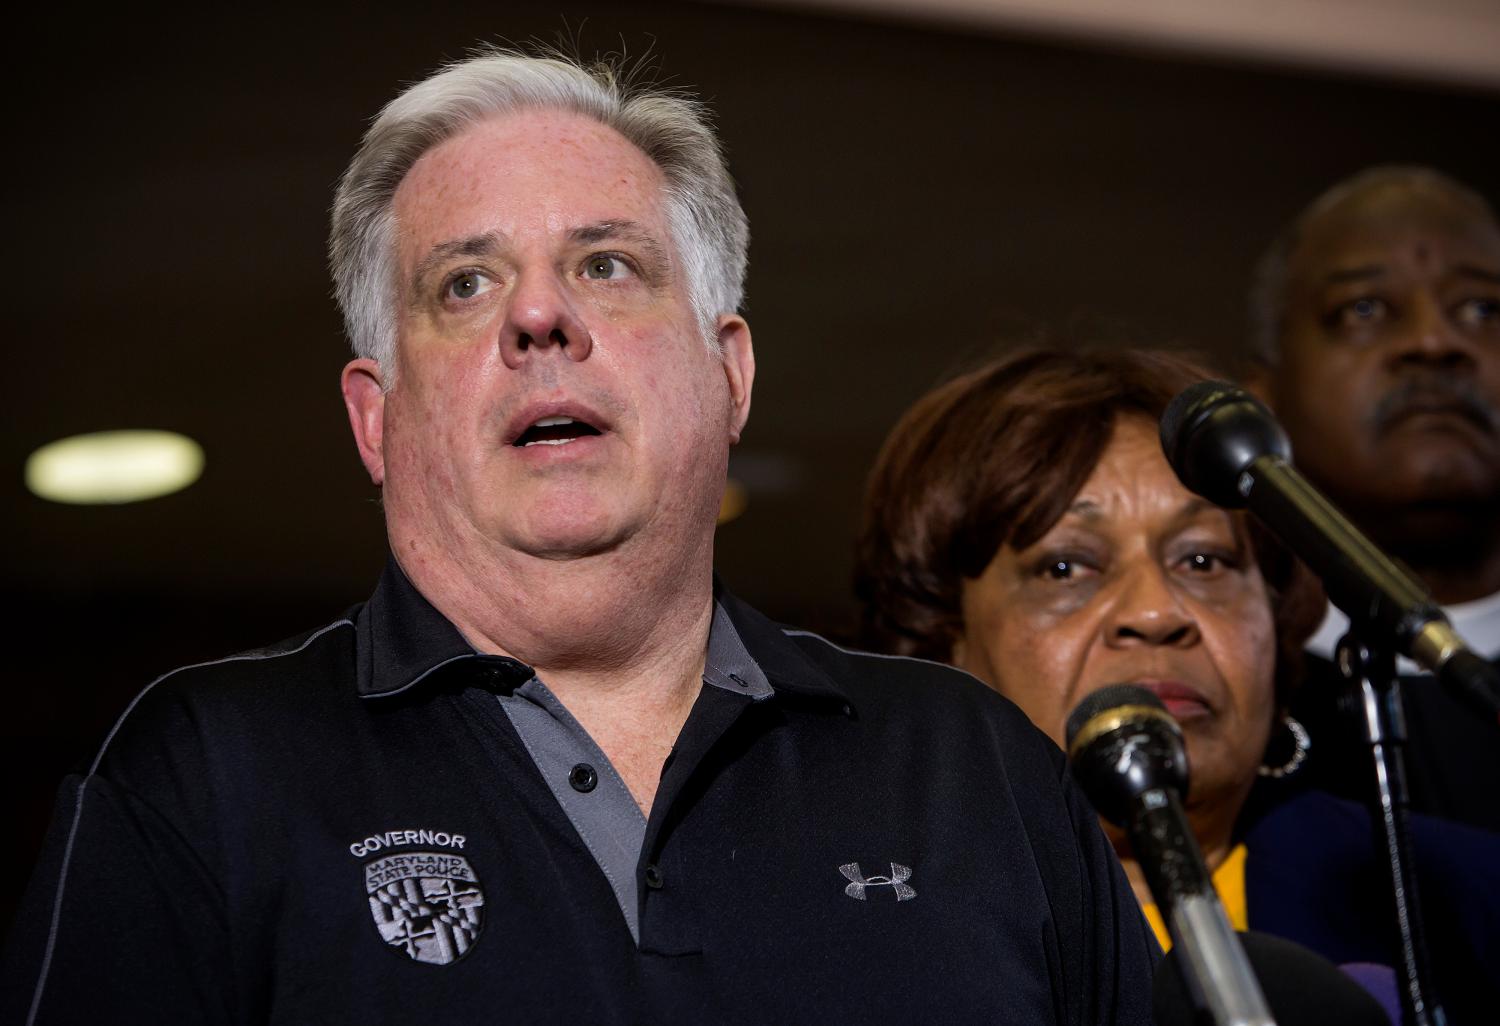 Maryland governor Larry Hogan speaks during a press conference in Baltimore, Maryland.